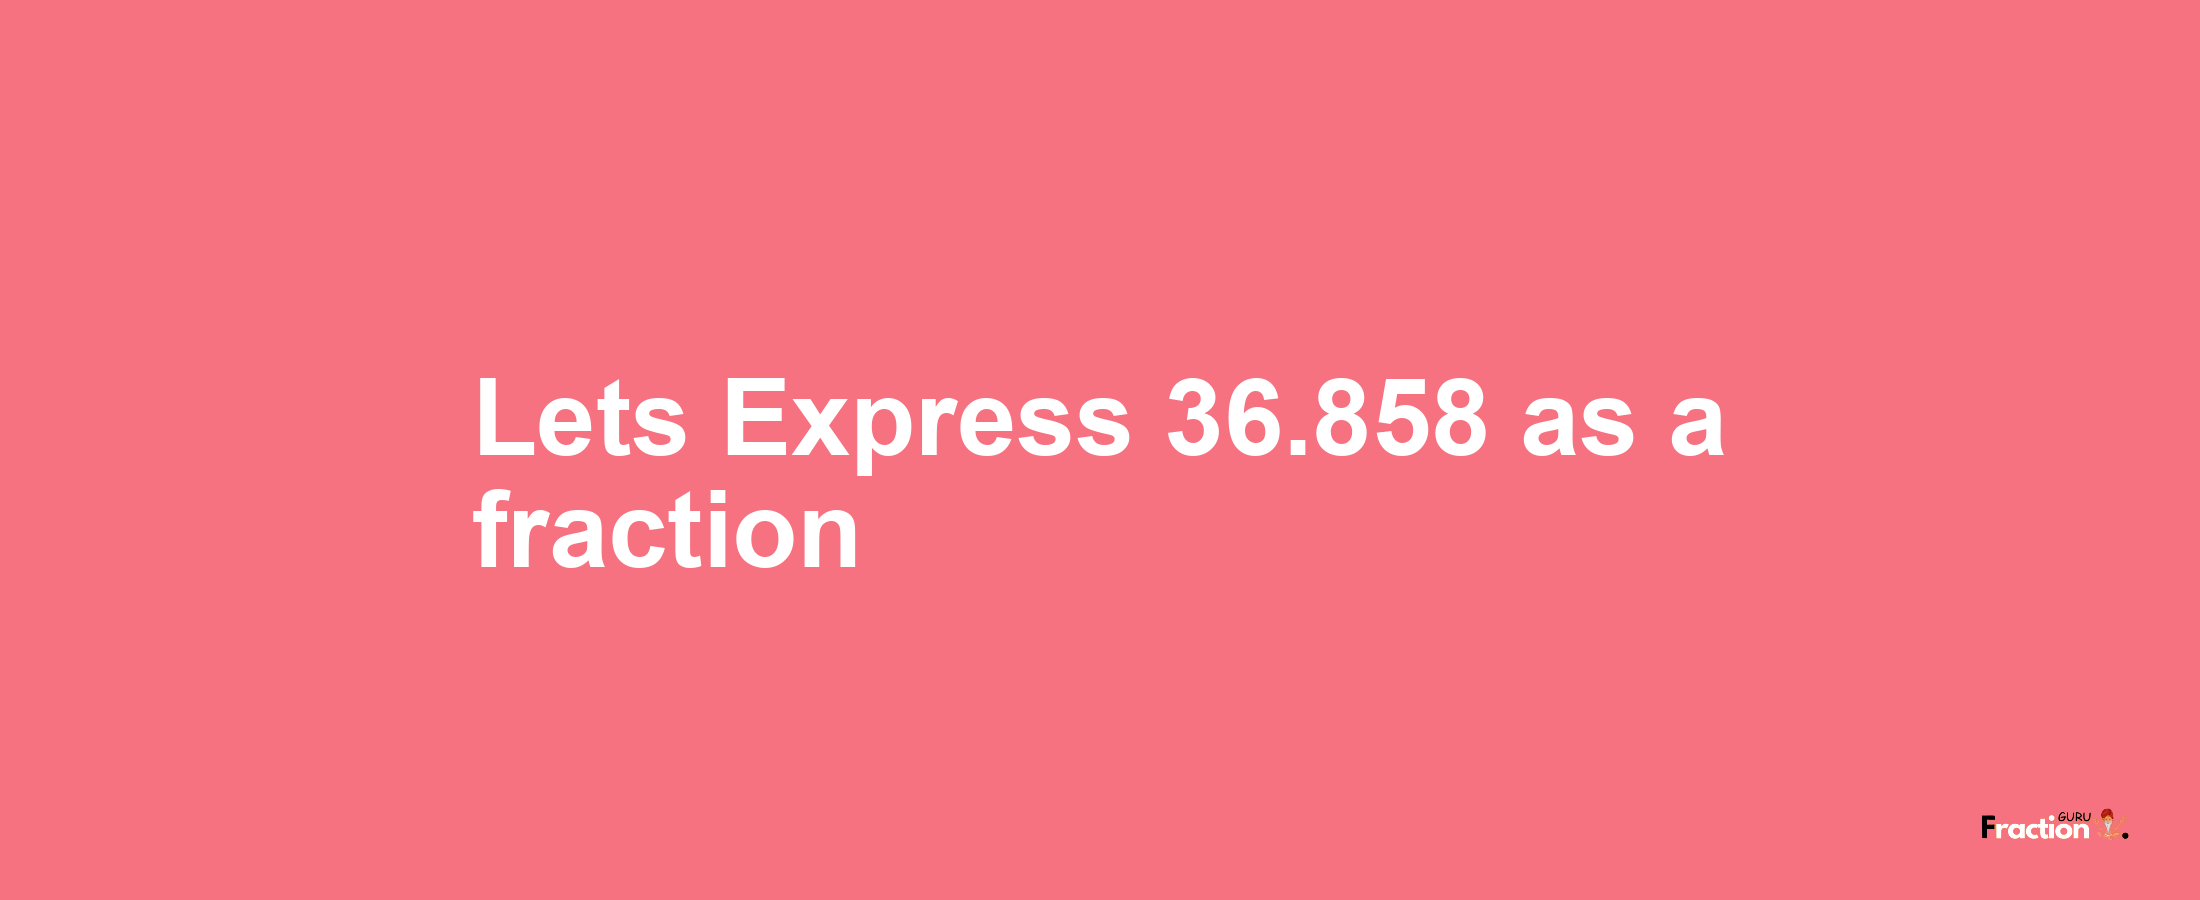 Lets Express 36.858 as afraction